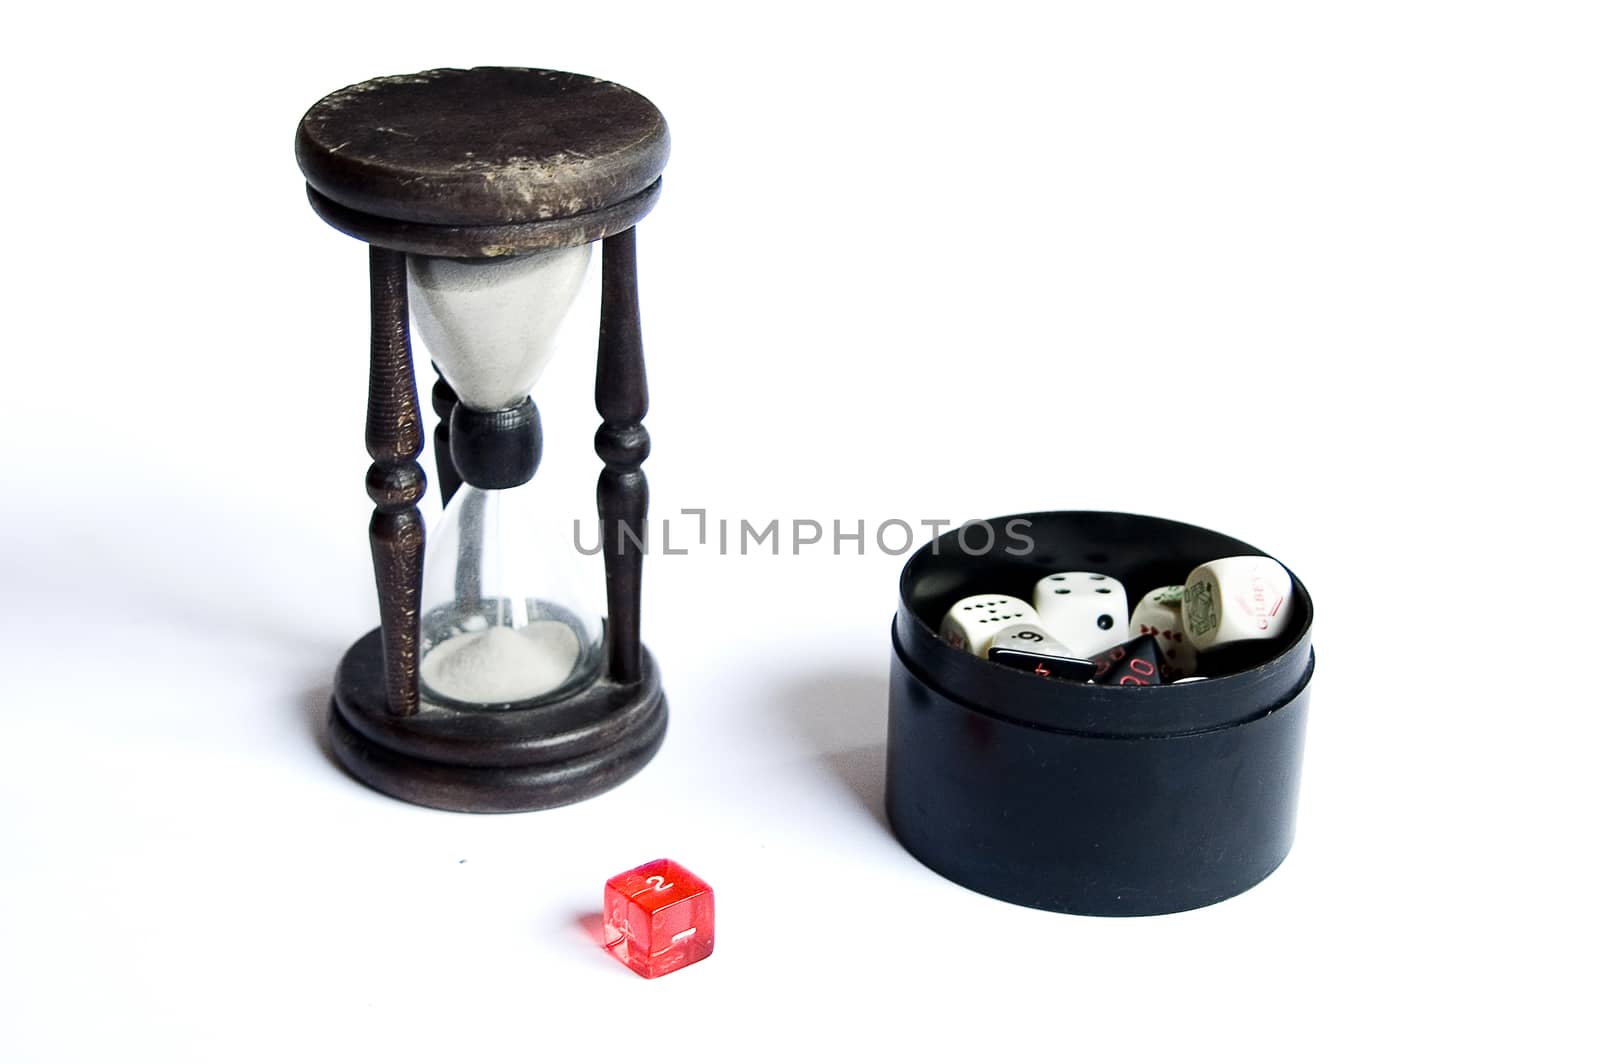 old wooden hourglass with a strap on a white background and dice in a black container